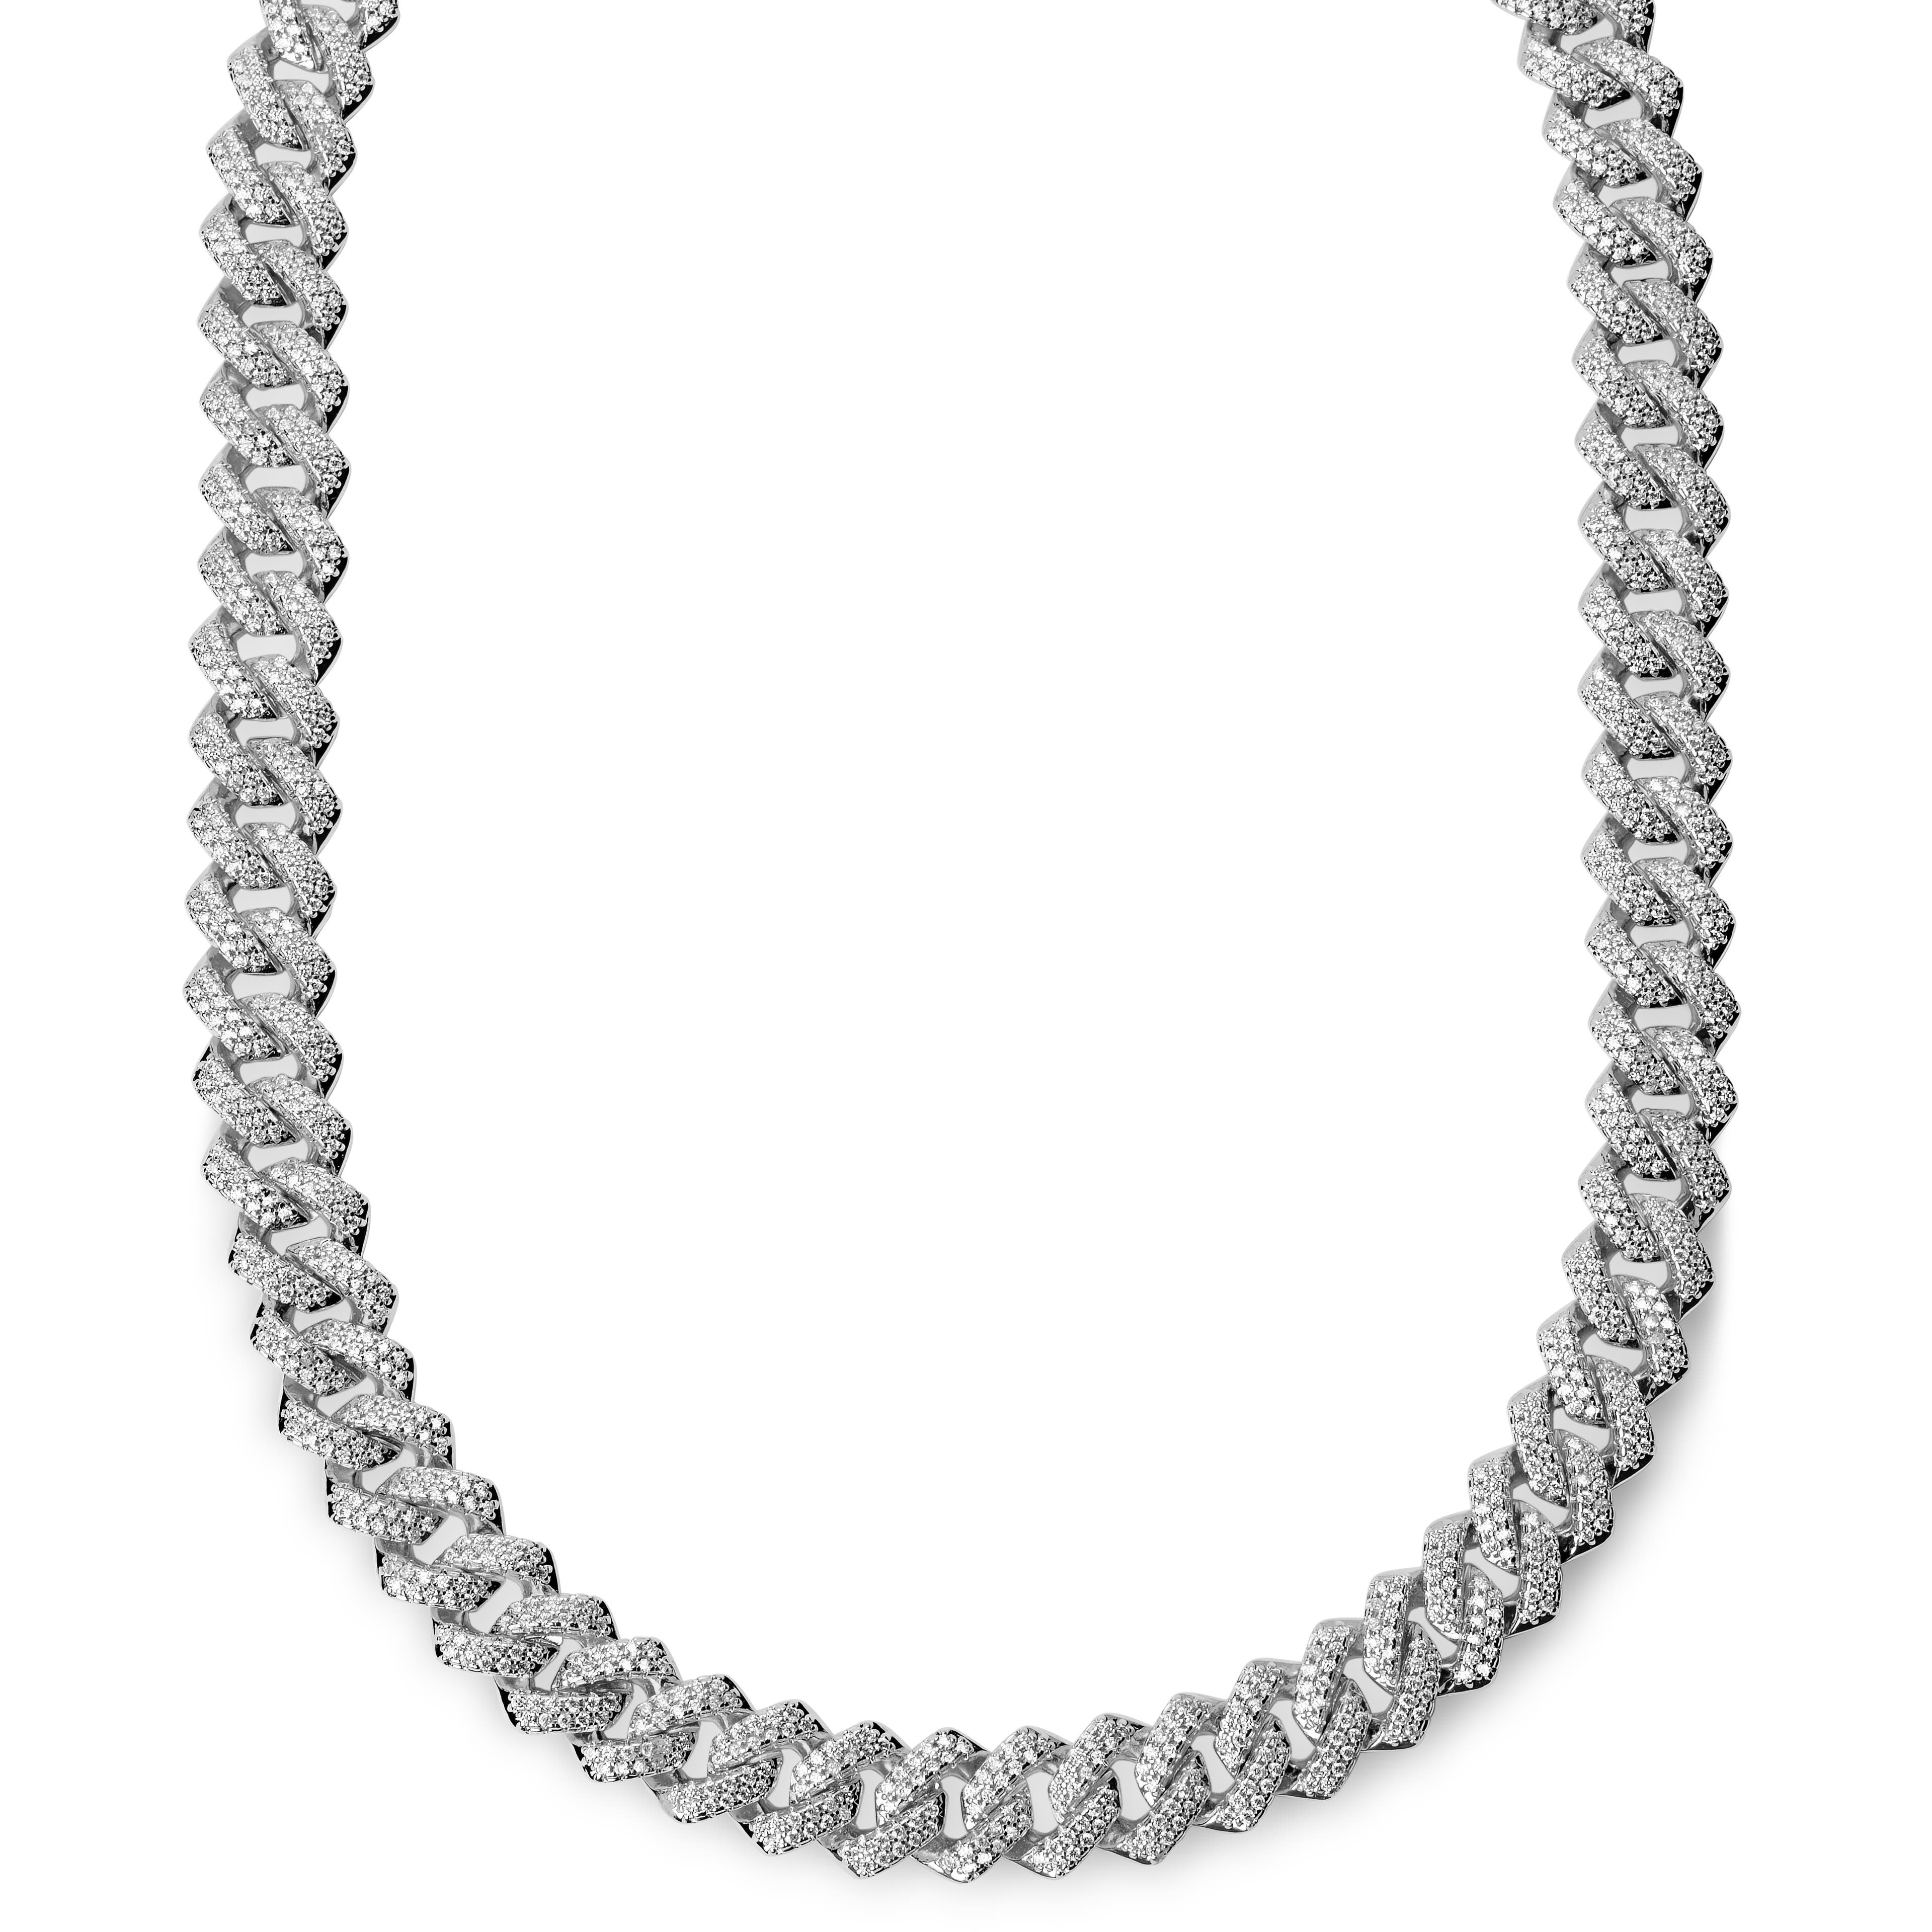 Nicos | 1/2" (12 mm) Iced Silver-tone Diamond Prong Link Chain Zirconia Necklace